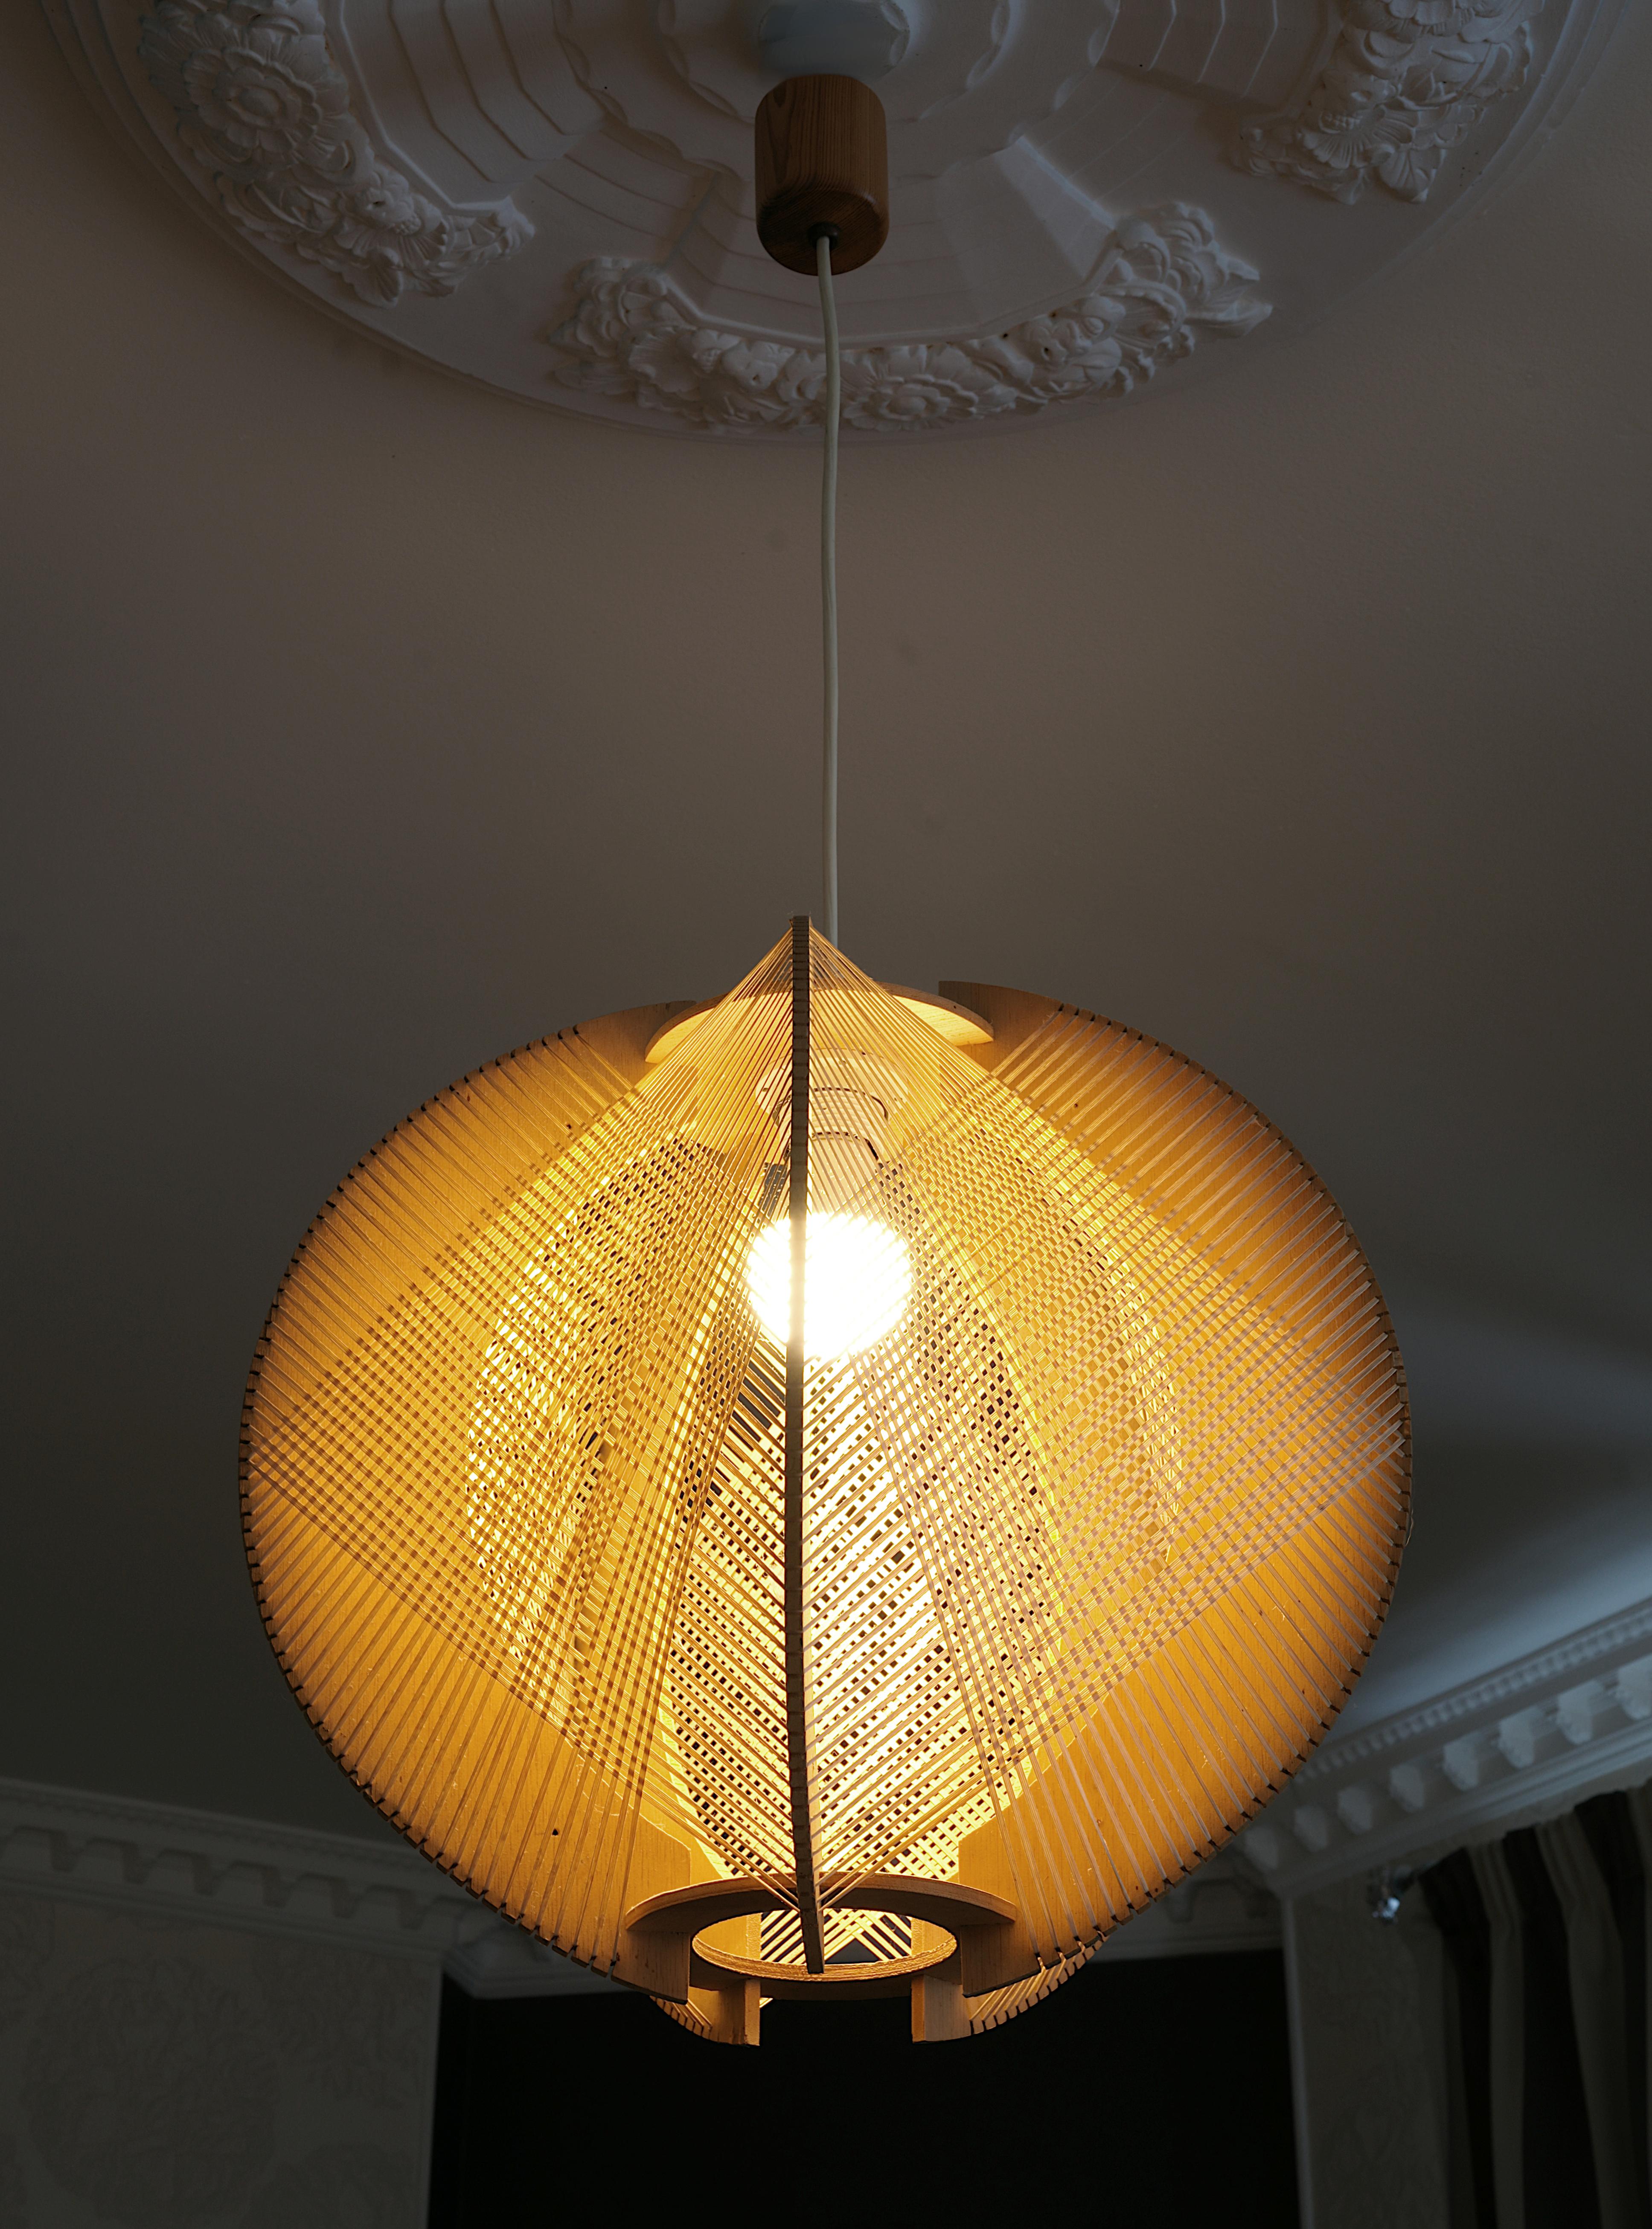 French Mid-century pendant chandelier, France, 1970s. Made of a fine wire stretched over a wooden frame. Height : 33